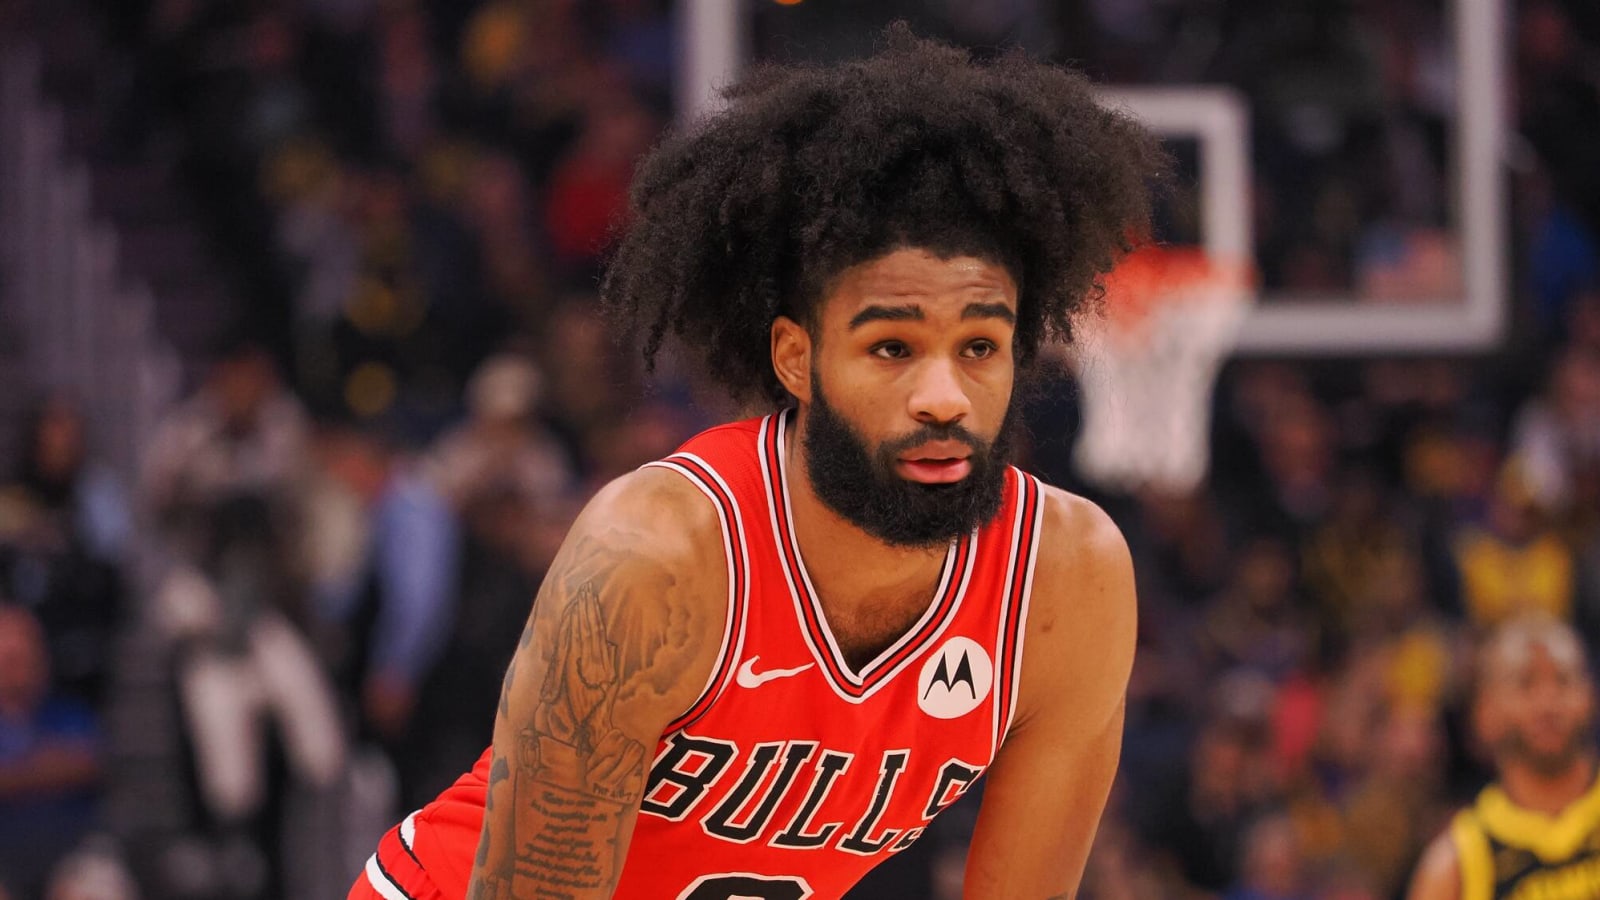 Chris Paul Says Coby White ‘Better’ Win Most Improved Player Of The Year Award